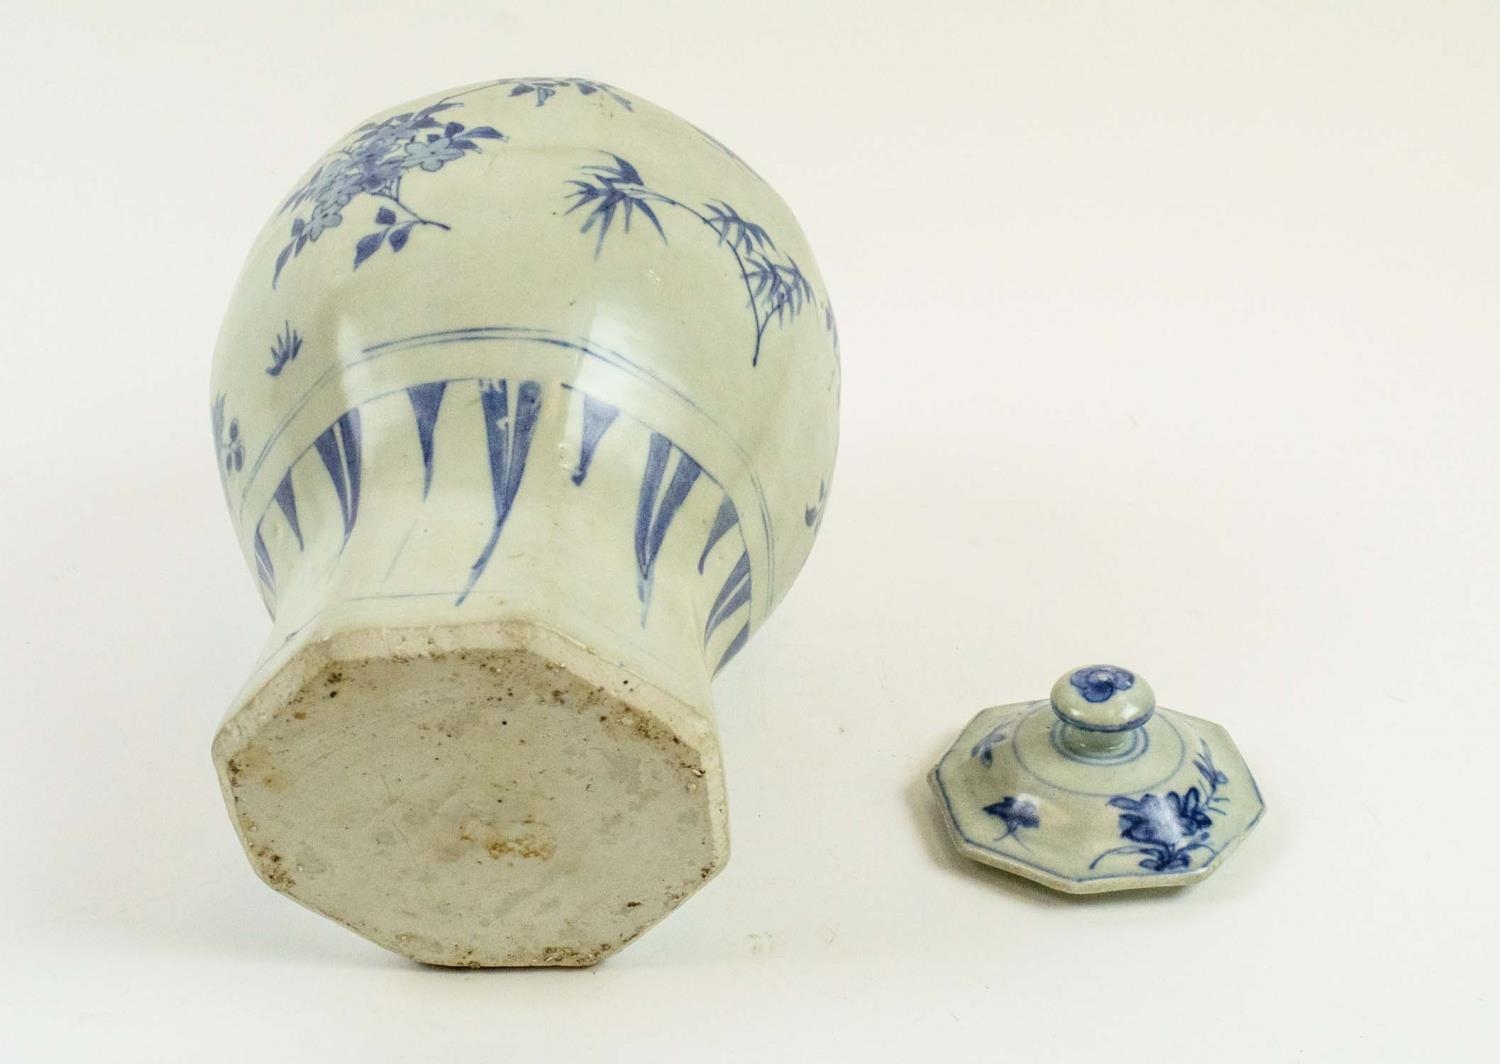 TRANSITIONAL 'HATCHER CARGO' OCTAGONAL BLUE AND WHITE BALUSTER VASE, circa 1640, with lid, decorated - Image 5 of 5